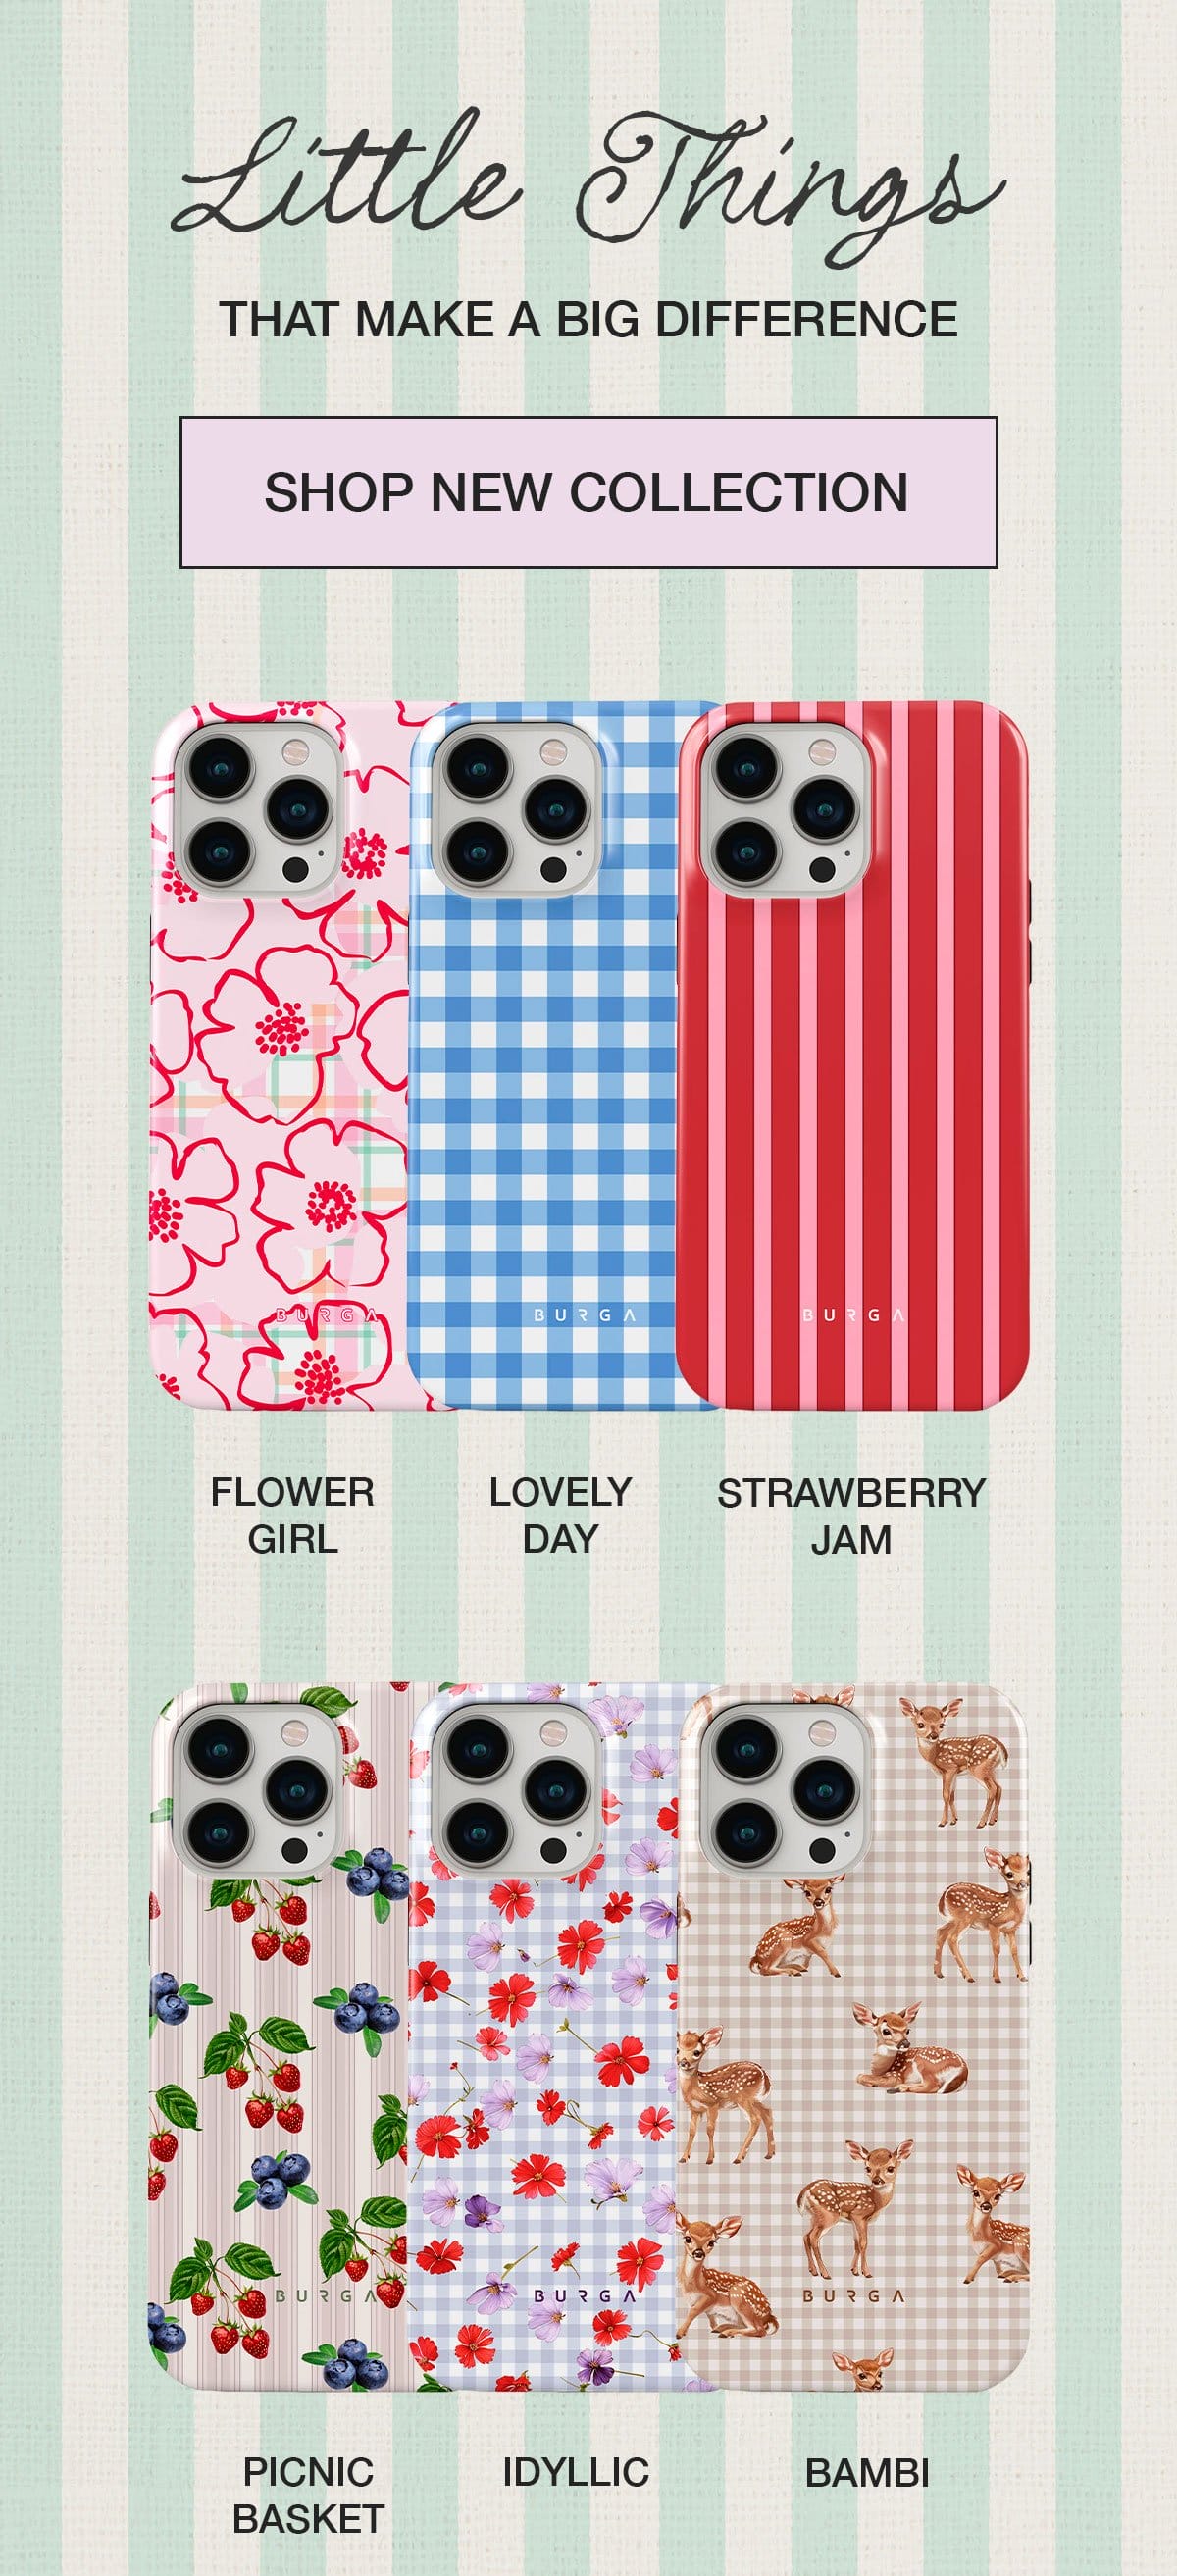 Discover the 'Little Things' That Make a Big Difference {collection} Let every day feel a little bit more magical. [BUY 4 PAY 2] Discount is applied automatically at checkout. Deal applies to phone cases only.